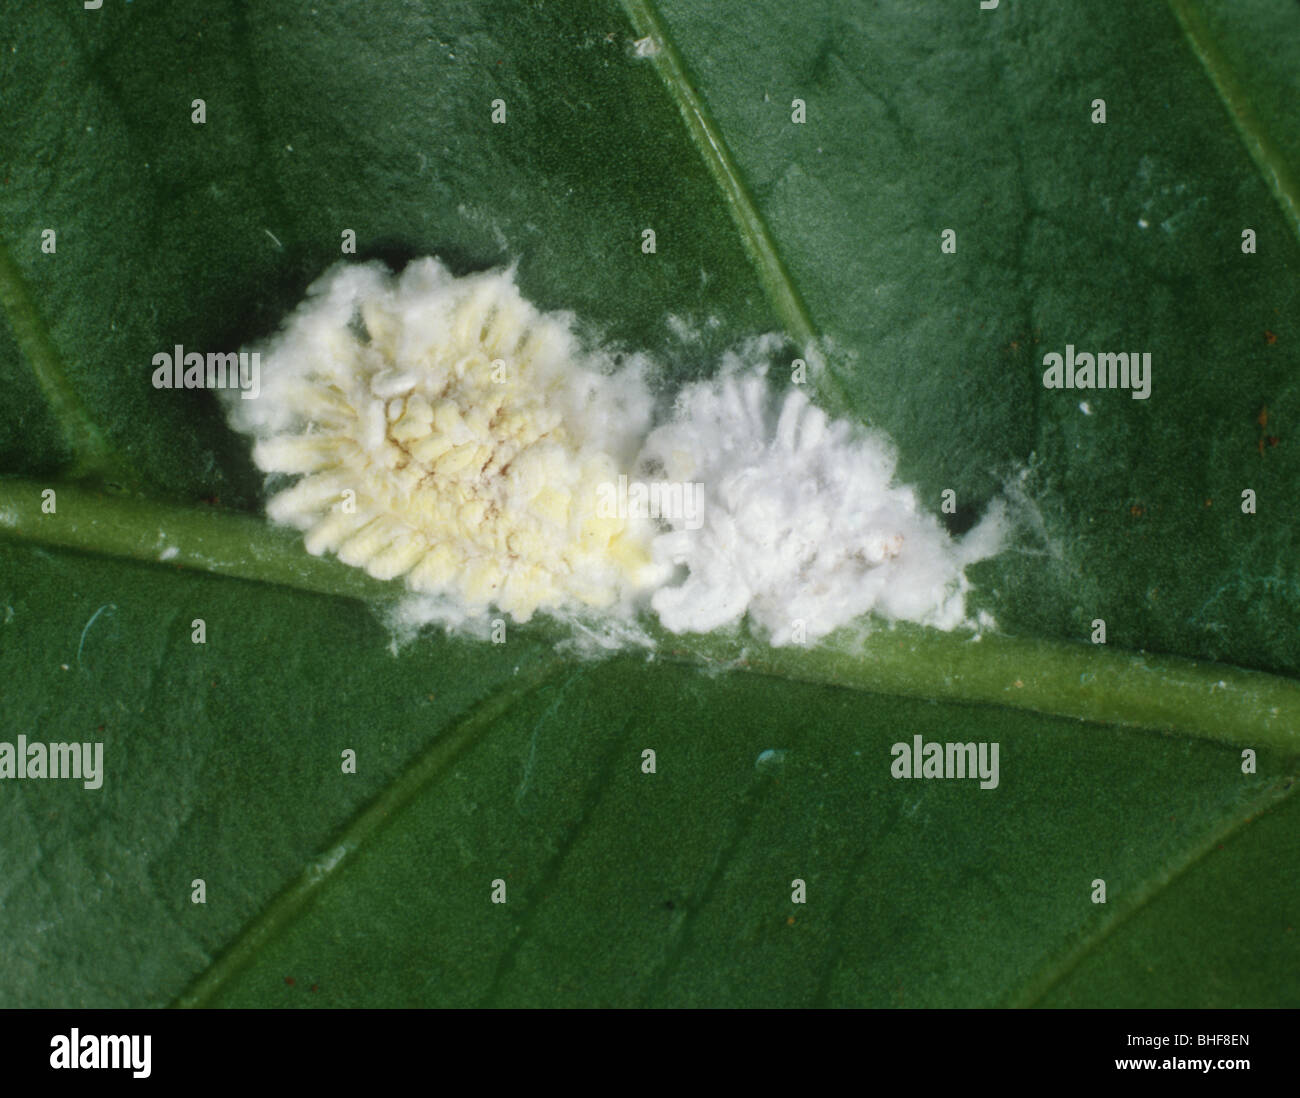 Cottony cushion scale insects (Icerya sp.) on a coffee leaf, Kenya Stock Photo